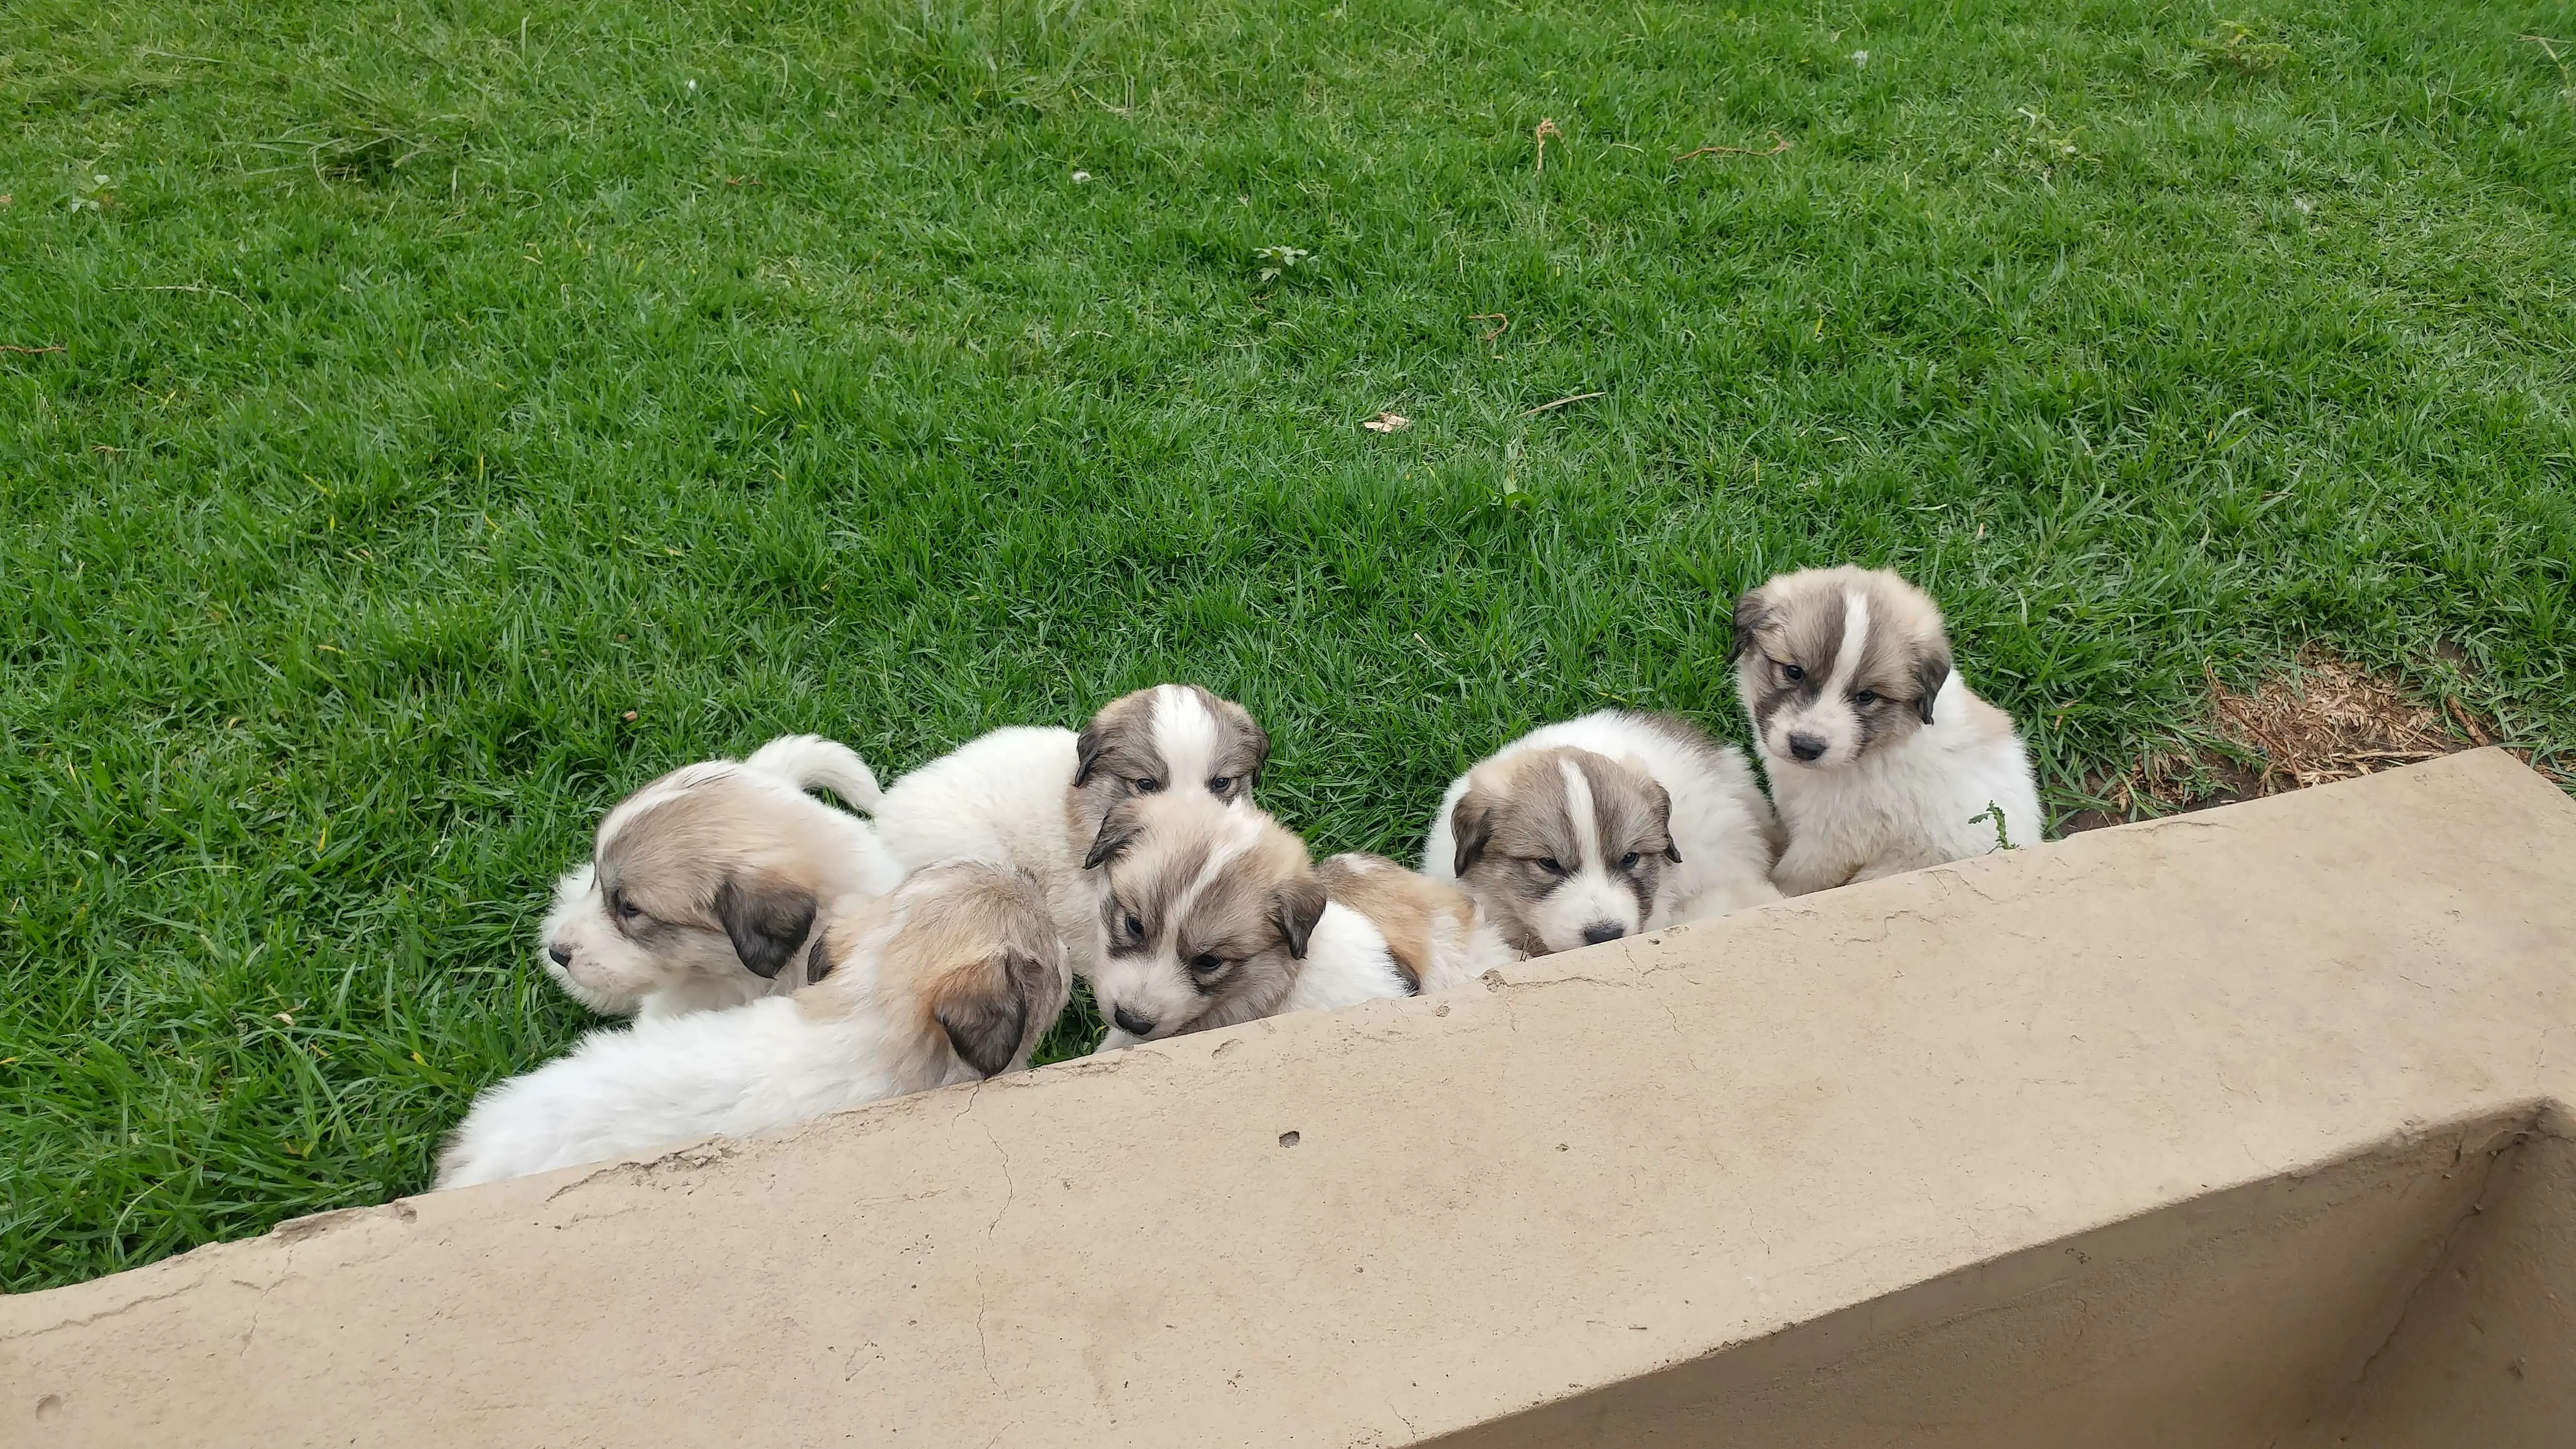 Other Puppies for Sale in Other by Liezel Naude